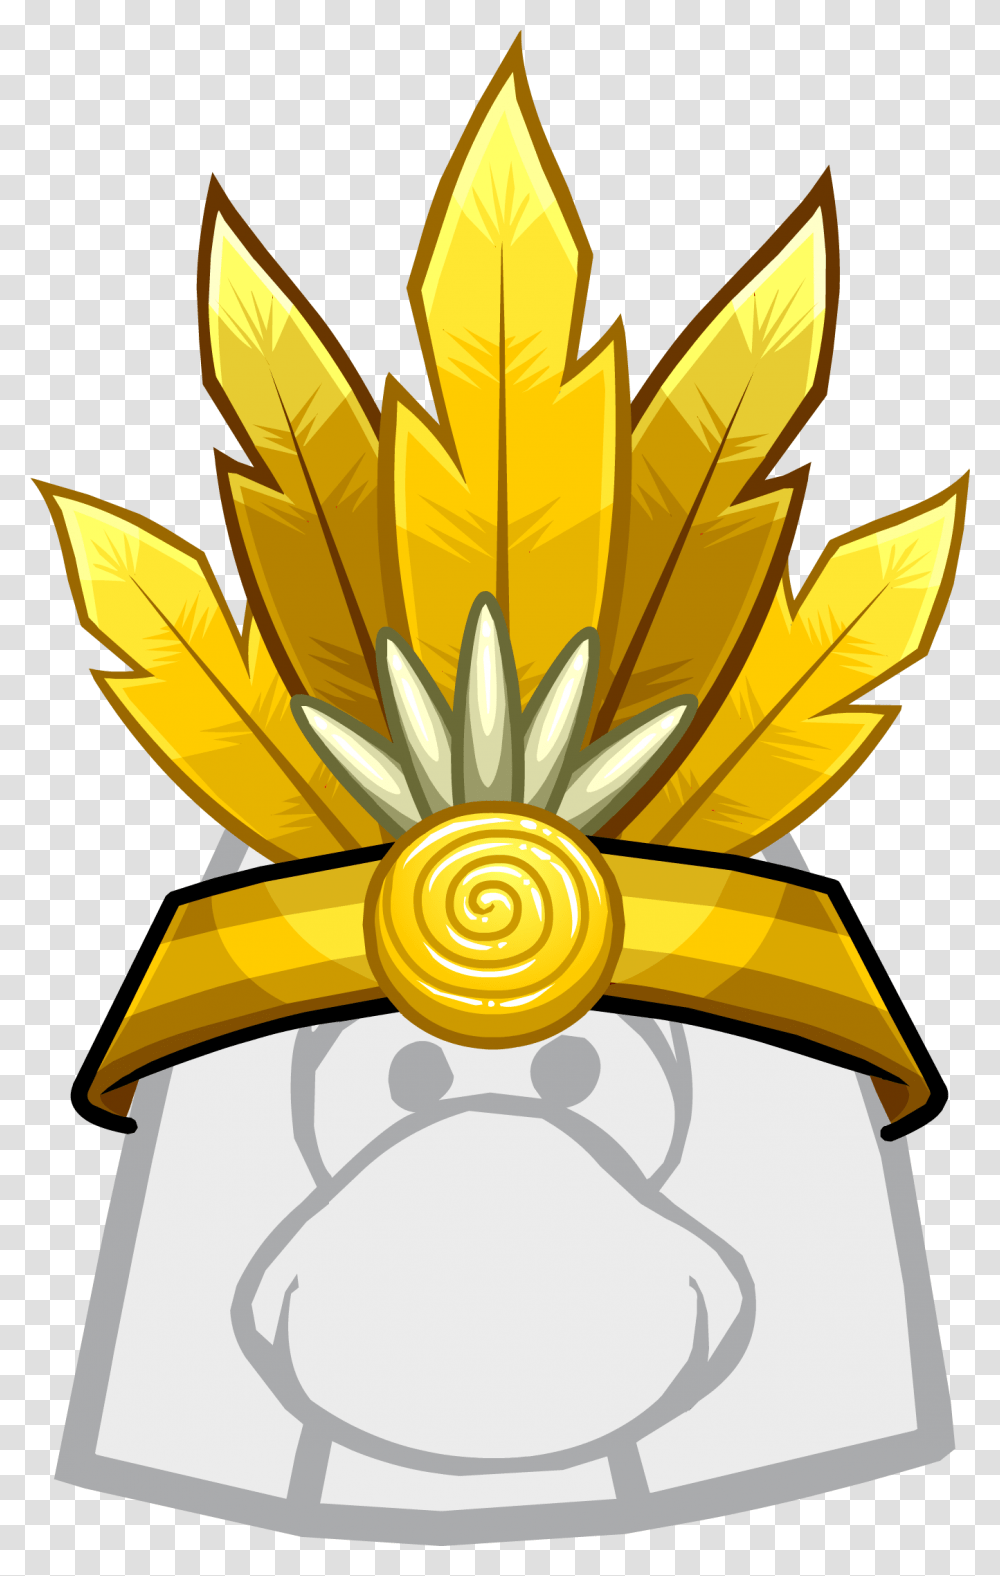 Club Penguin Rewritten Wiki Club Penguin With Hair, Leaf, Plant, Gold Transparent Png